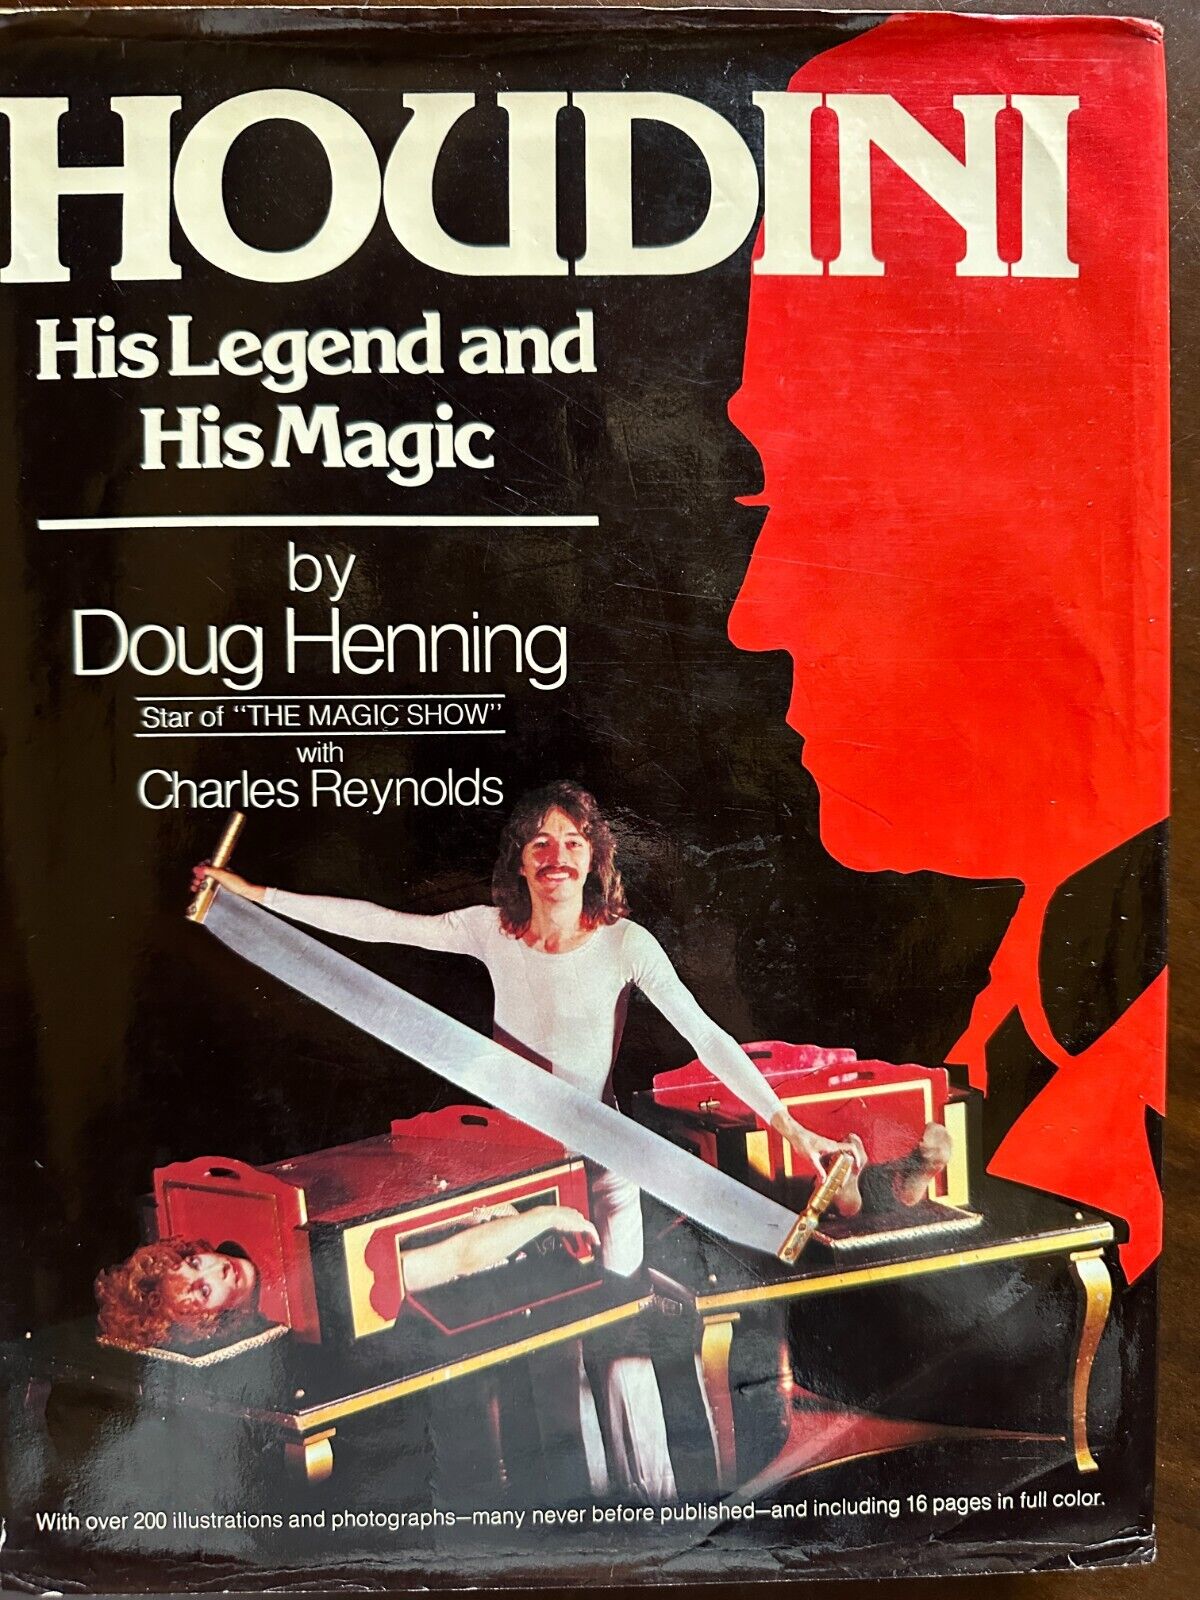 Houdini His Legend and Magic by Doug Henning \'77 from the library Houdini Museum